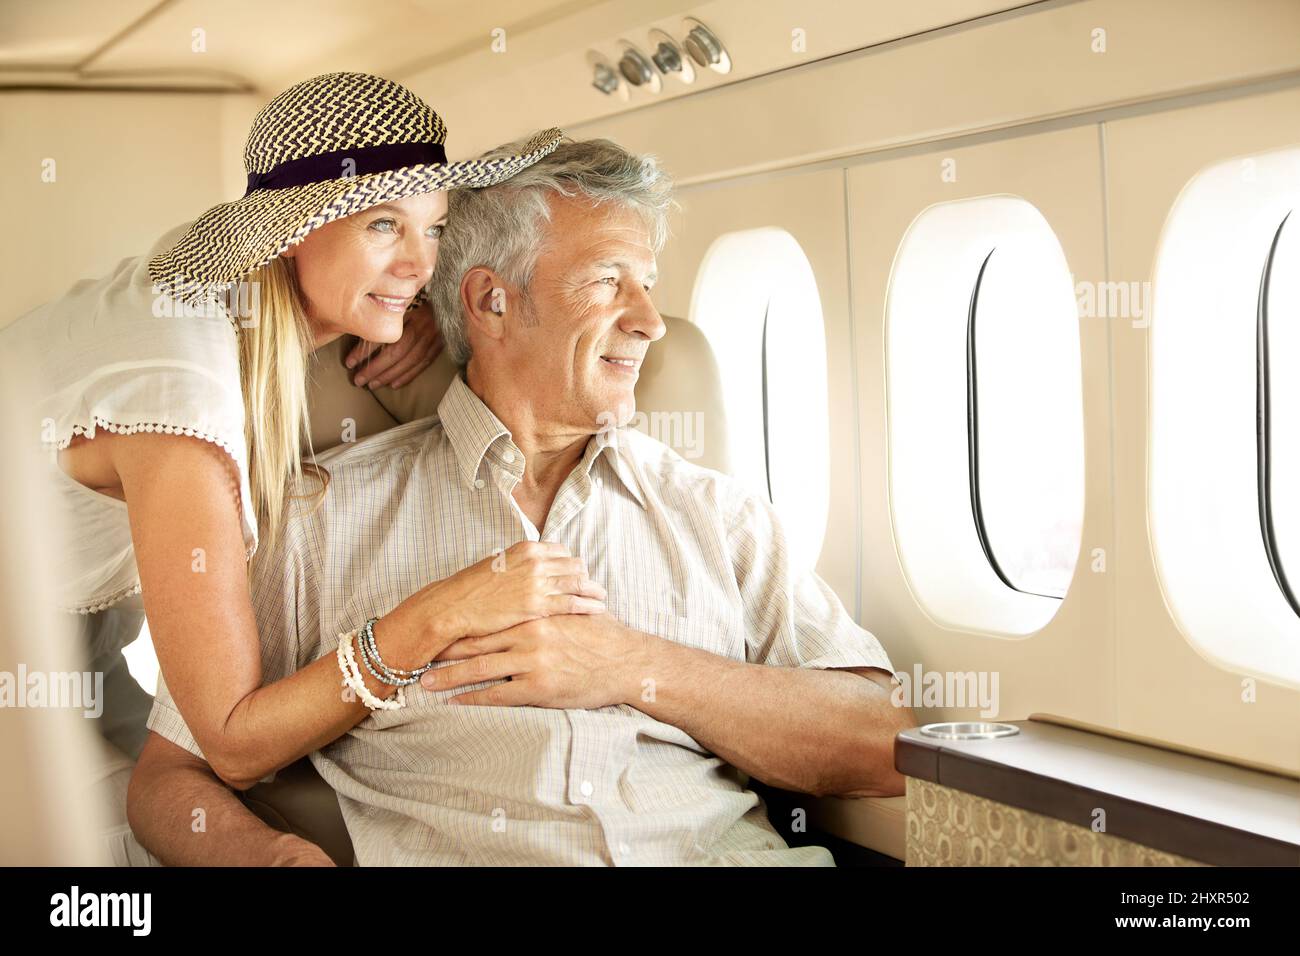 Taking a luxury trip. Smiling senior couple on an airplane looking out the window. Stock Photo